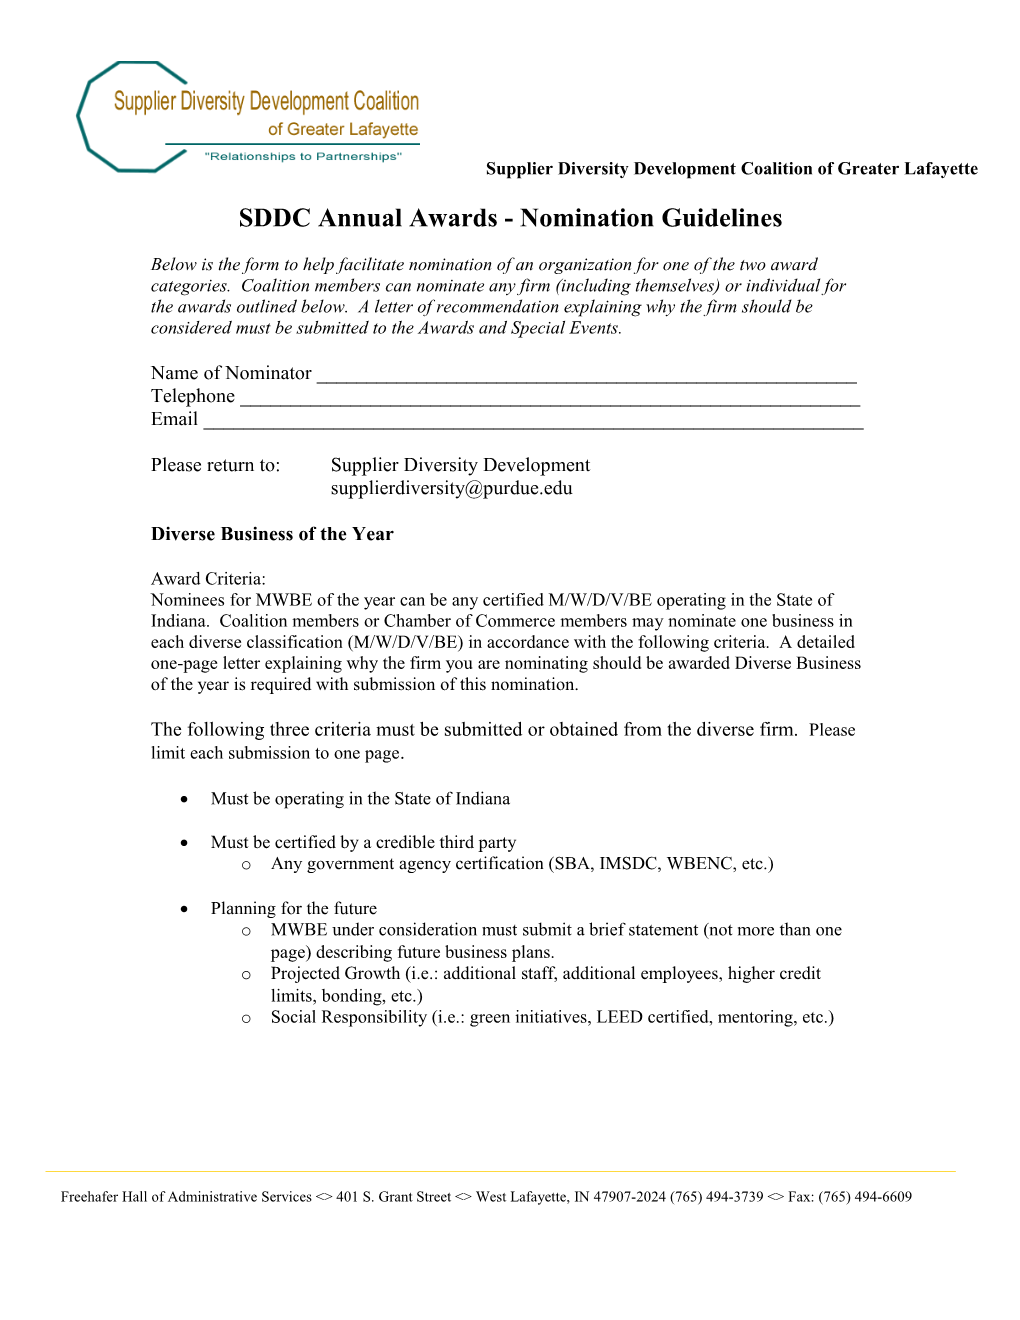 SDDC Annual Awards - Nomination Guidelines